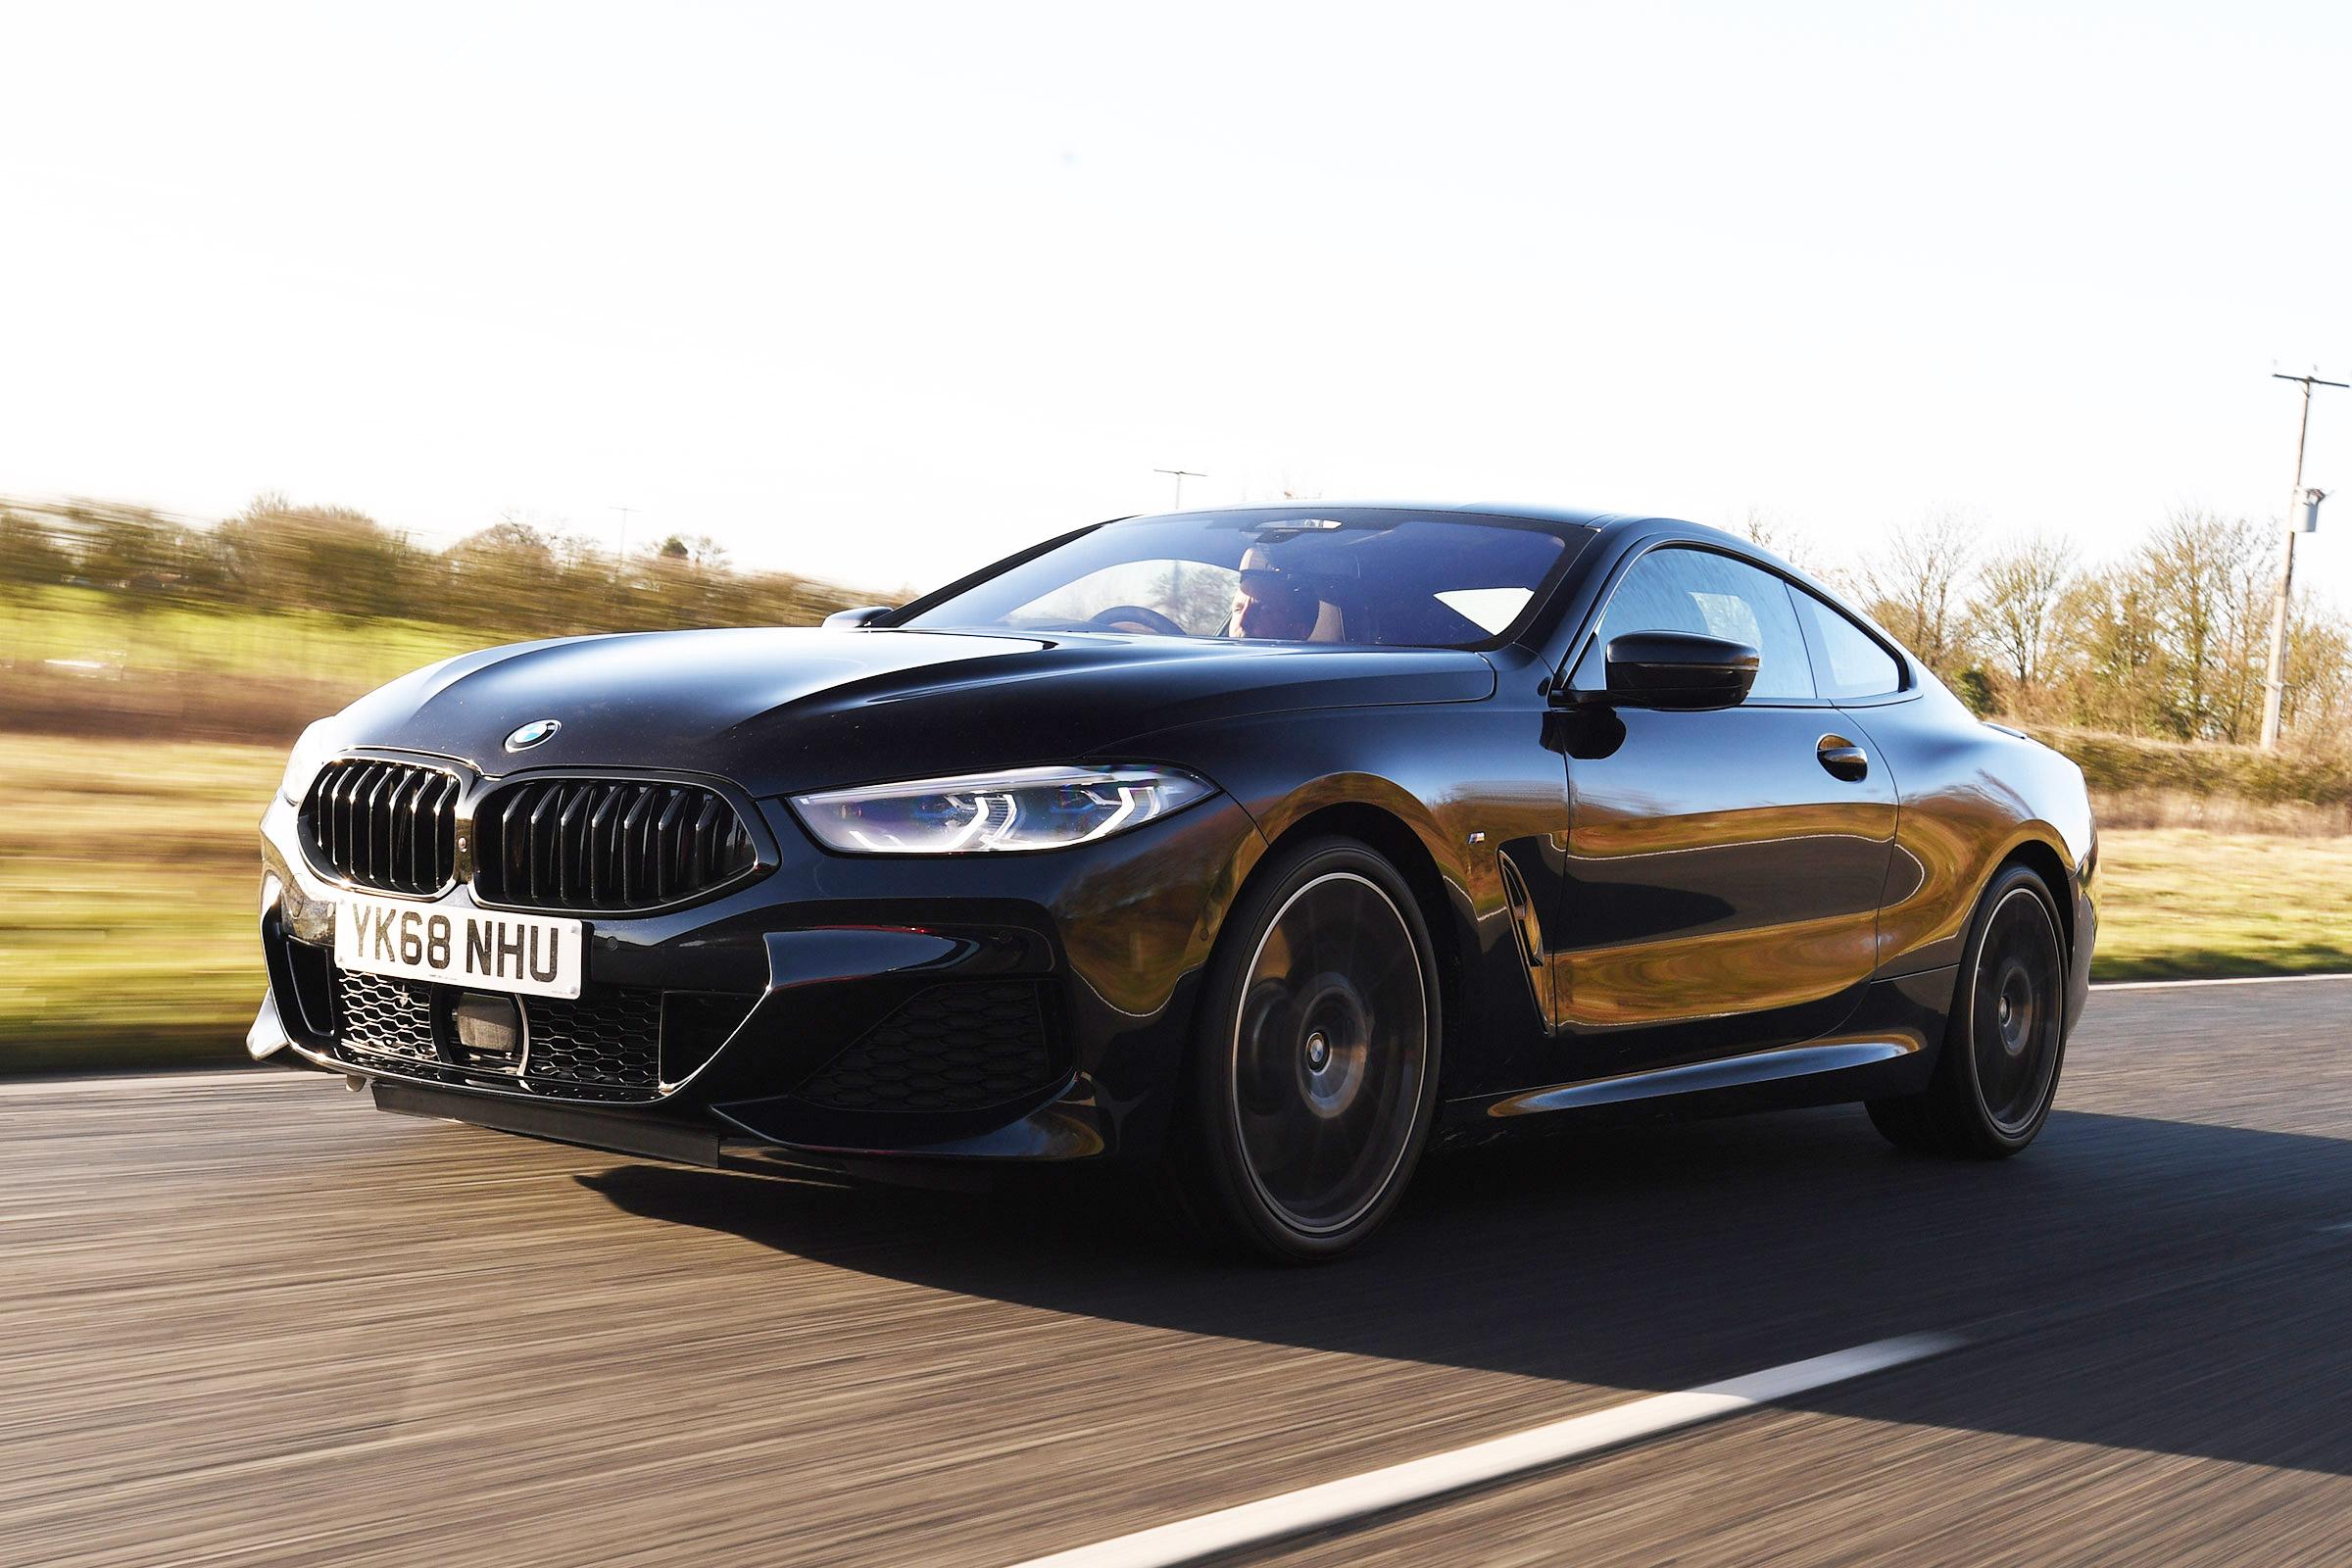 New BMW 840d xDrive 2019 review